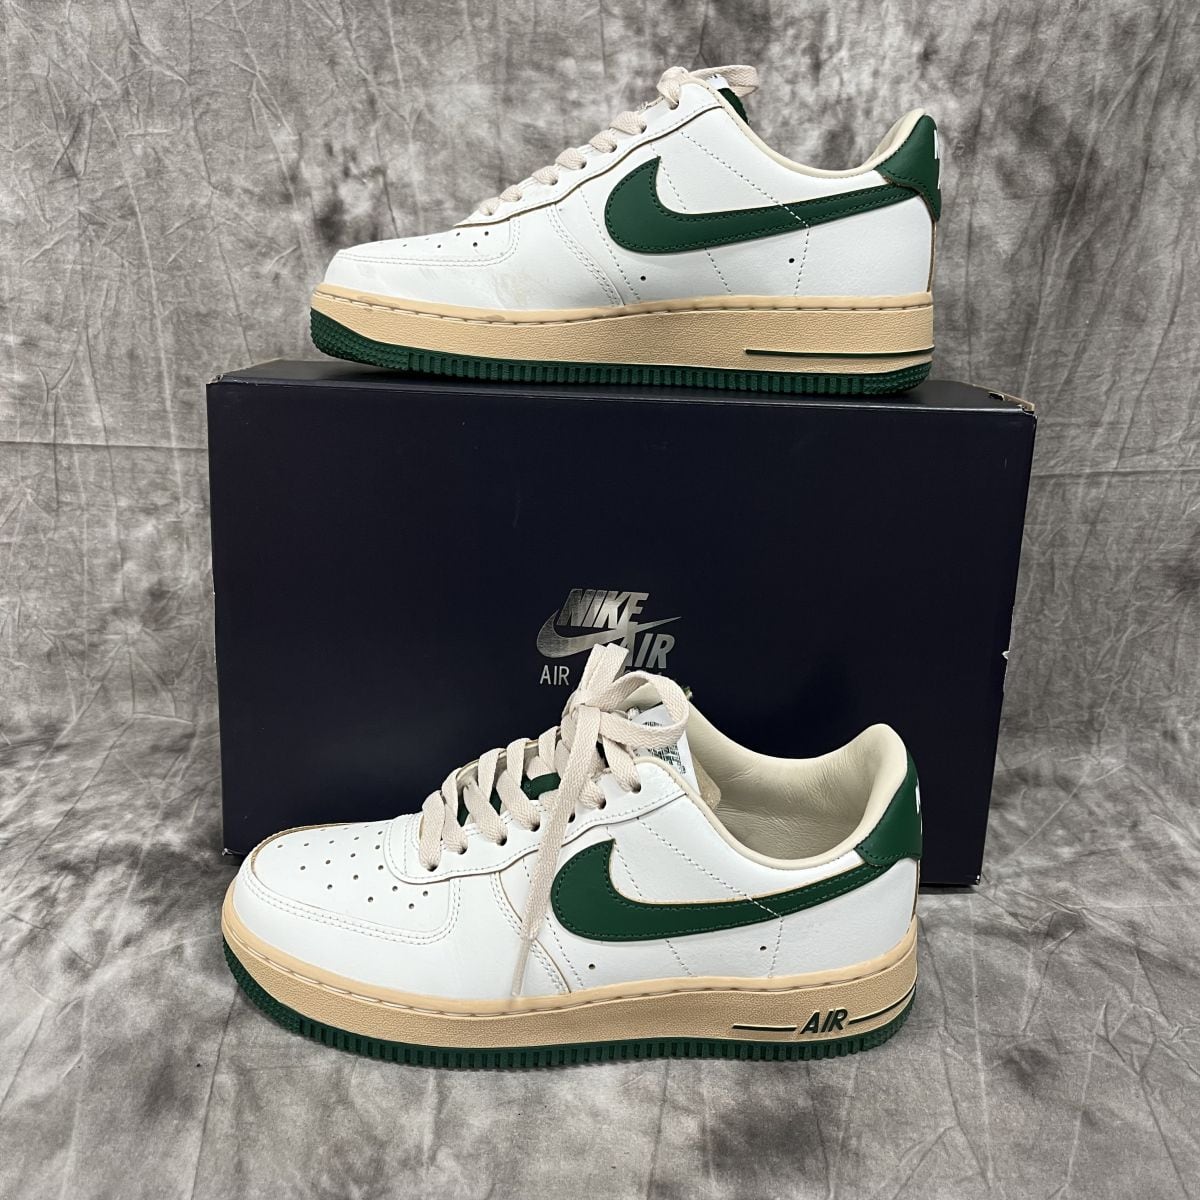 NIKE/ナイキ WMNS AIR FORCE 1 LOW '07 LV8 Green and Muslin ...